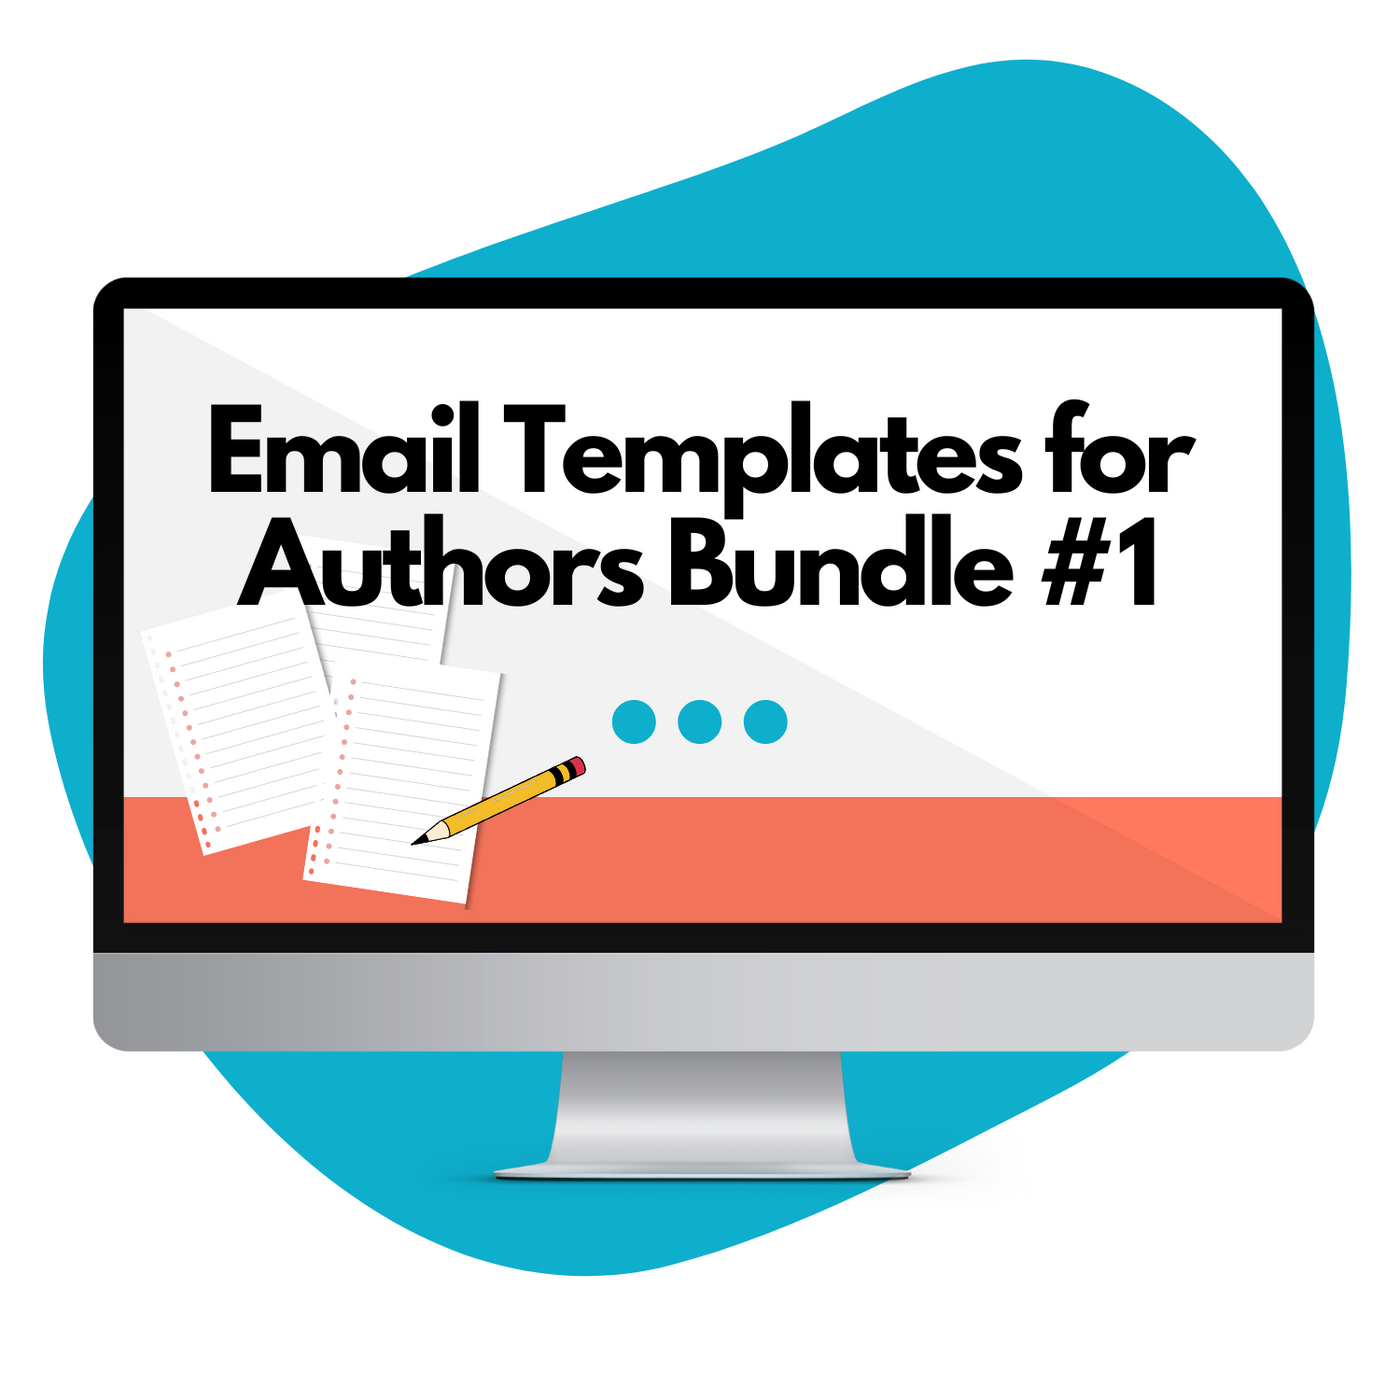 Email Template for Authors Bundle #1